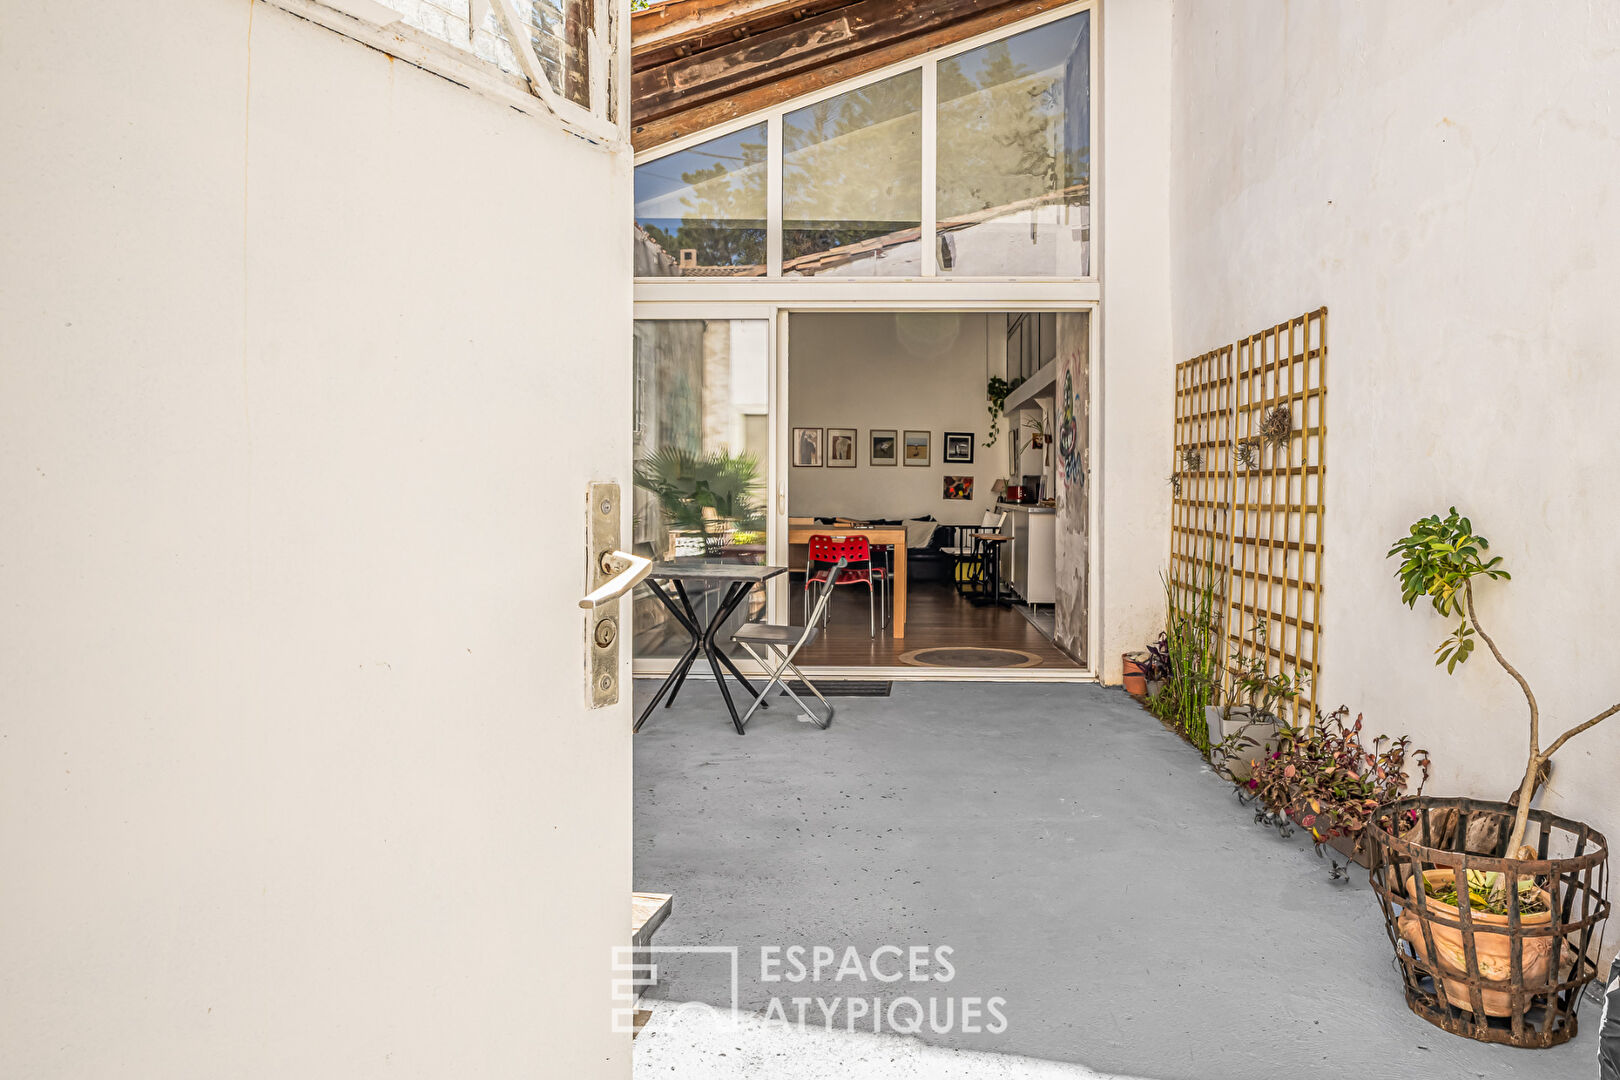 Former artist’s studio renovated into a loft with interior courtyard